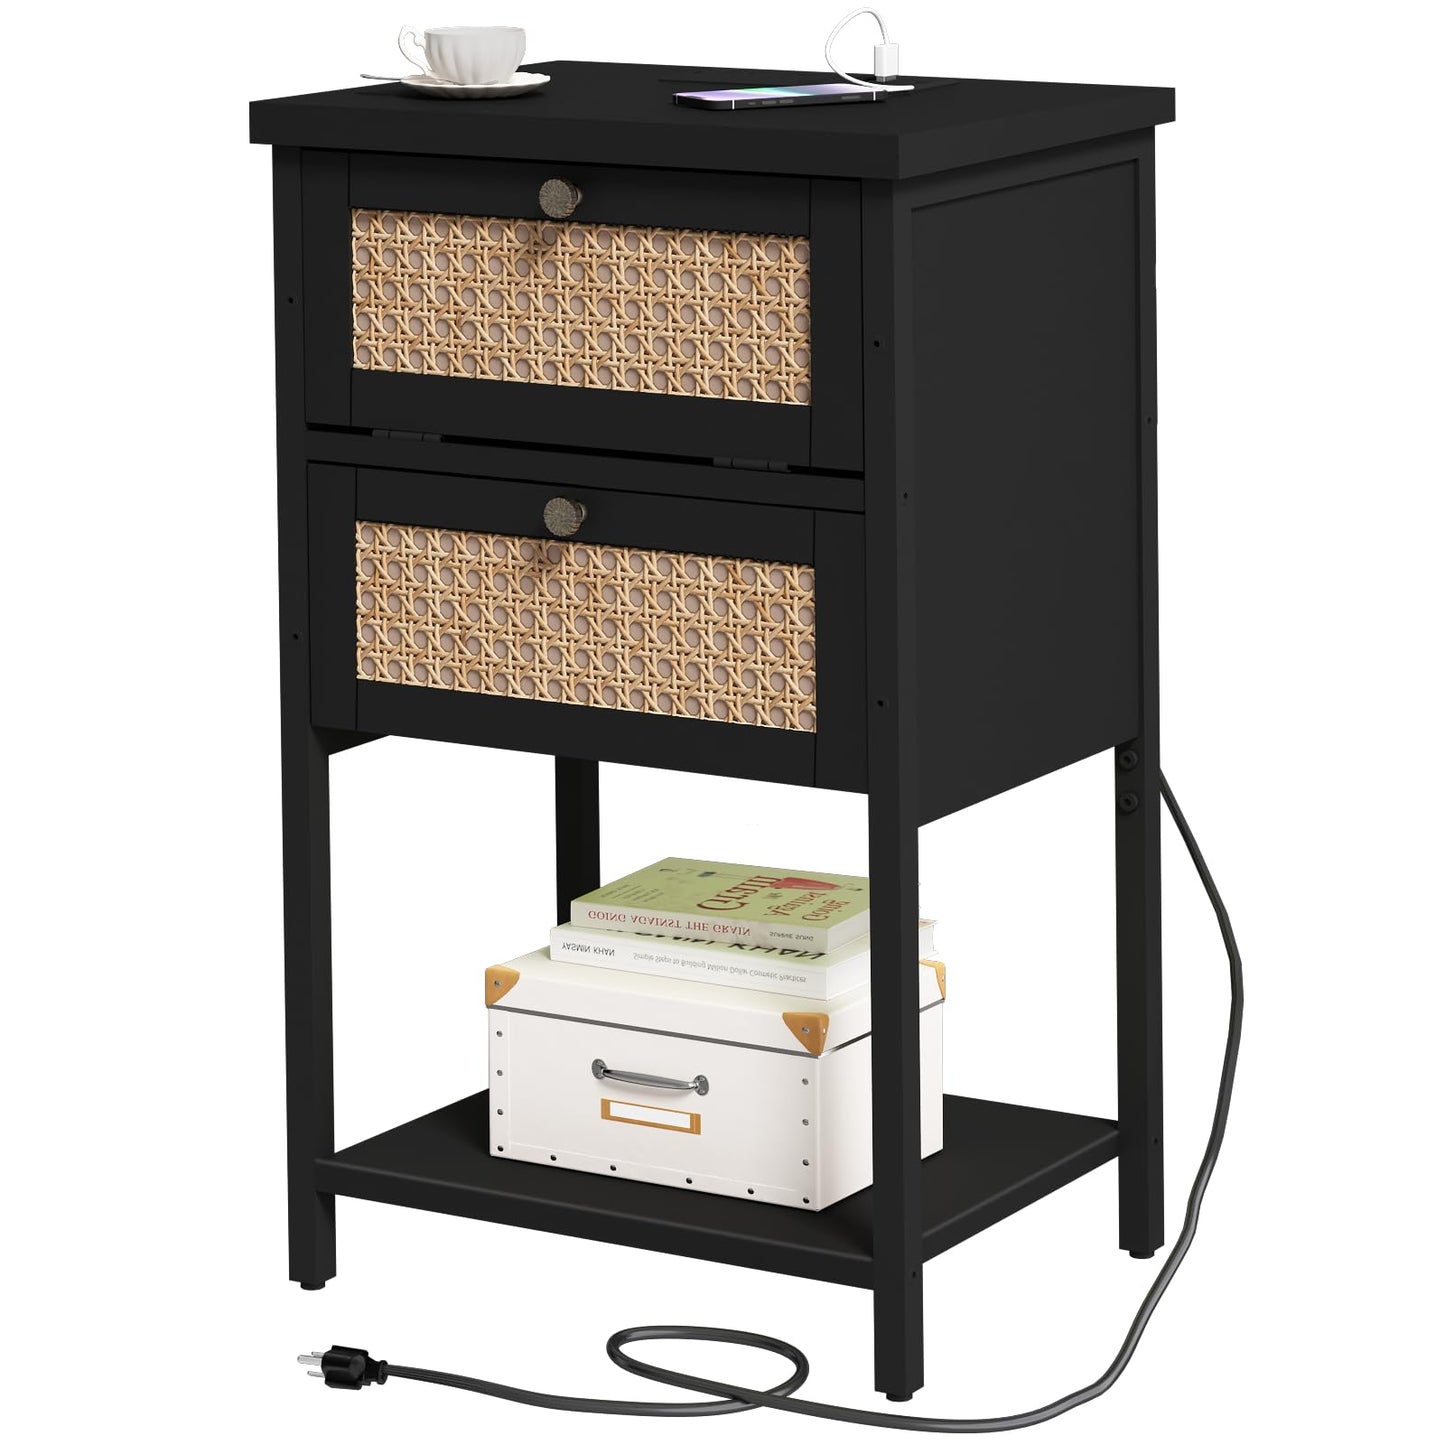 End Table with Charging Station, 2 Tier Rattan Decorated Nightstand with USB Ports and Outlets, Bedside Table with Drawer, Black Modern Sofa Side Table for Bedroom, Living Room, Office